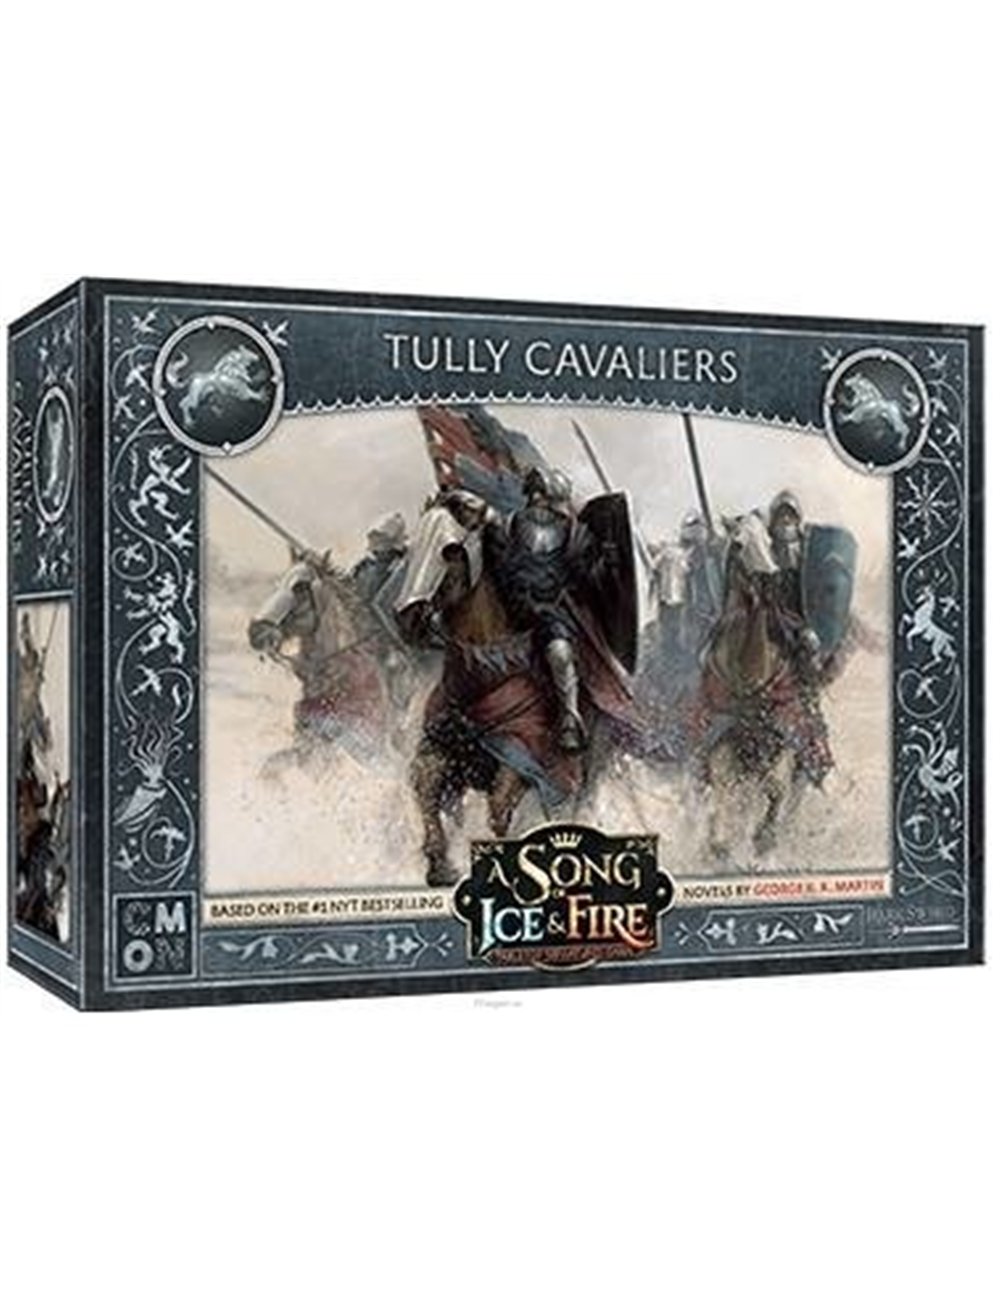 A SONG OF ICE & FIRE: Tully Cavaliers